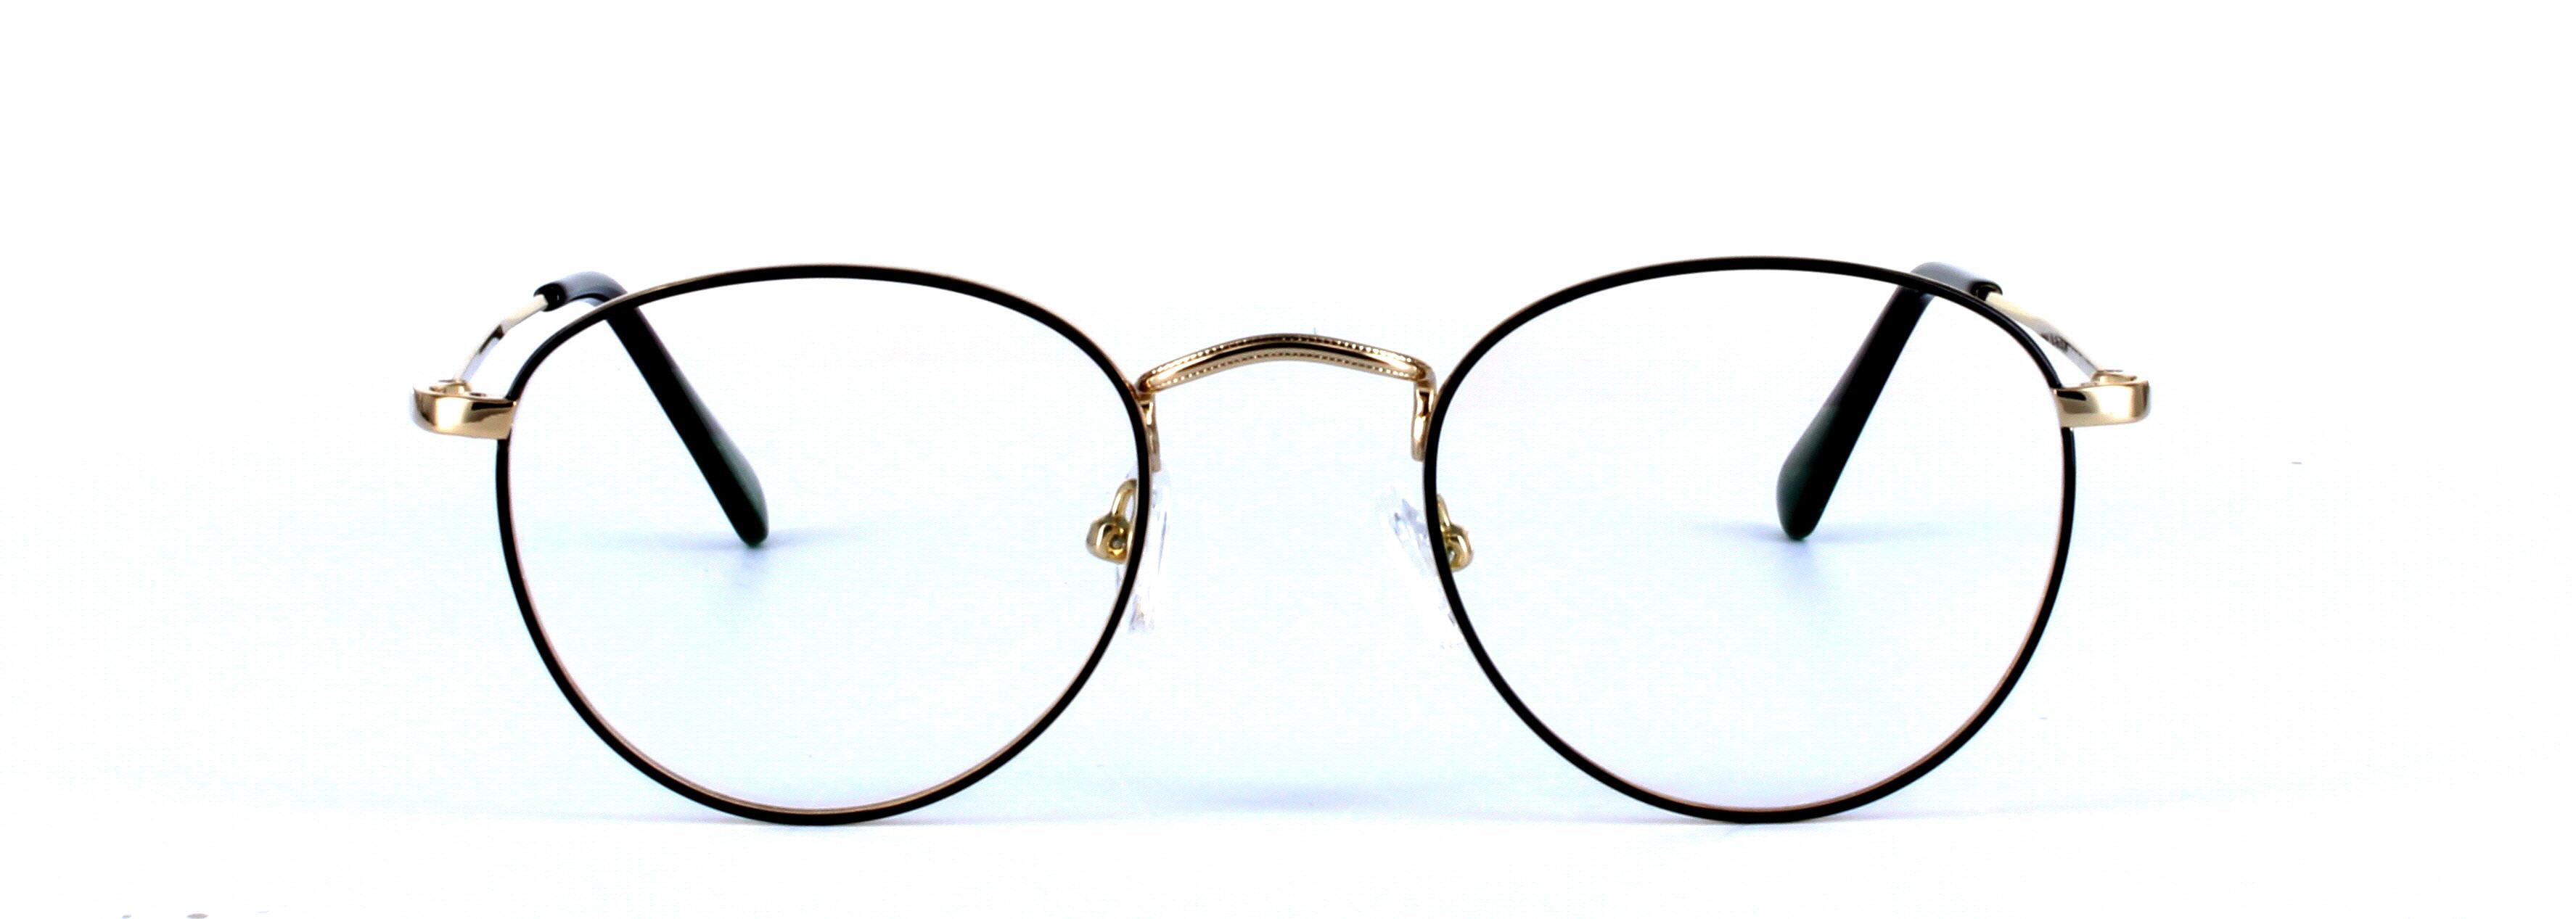 Birdy Gold Full Rim Round Metal Glasses - Image View 5